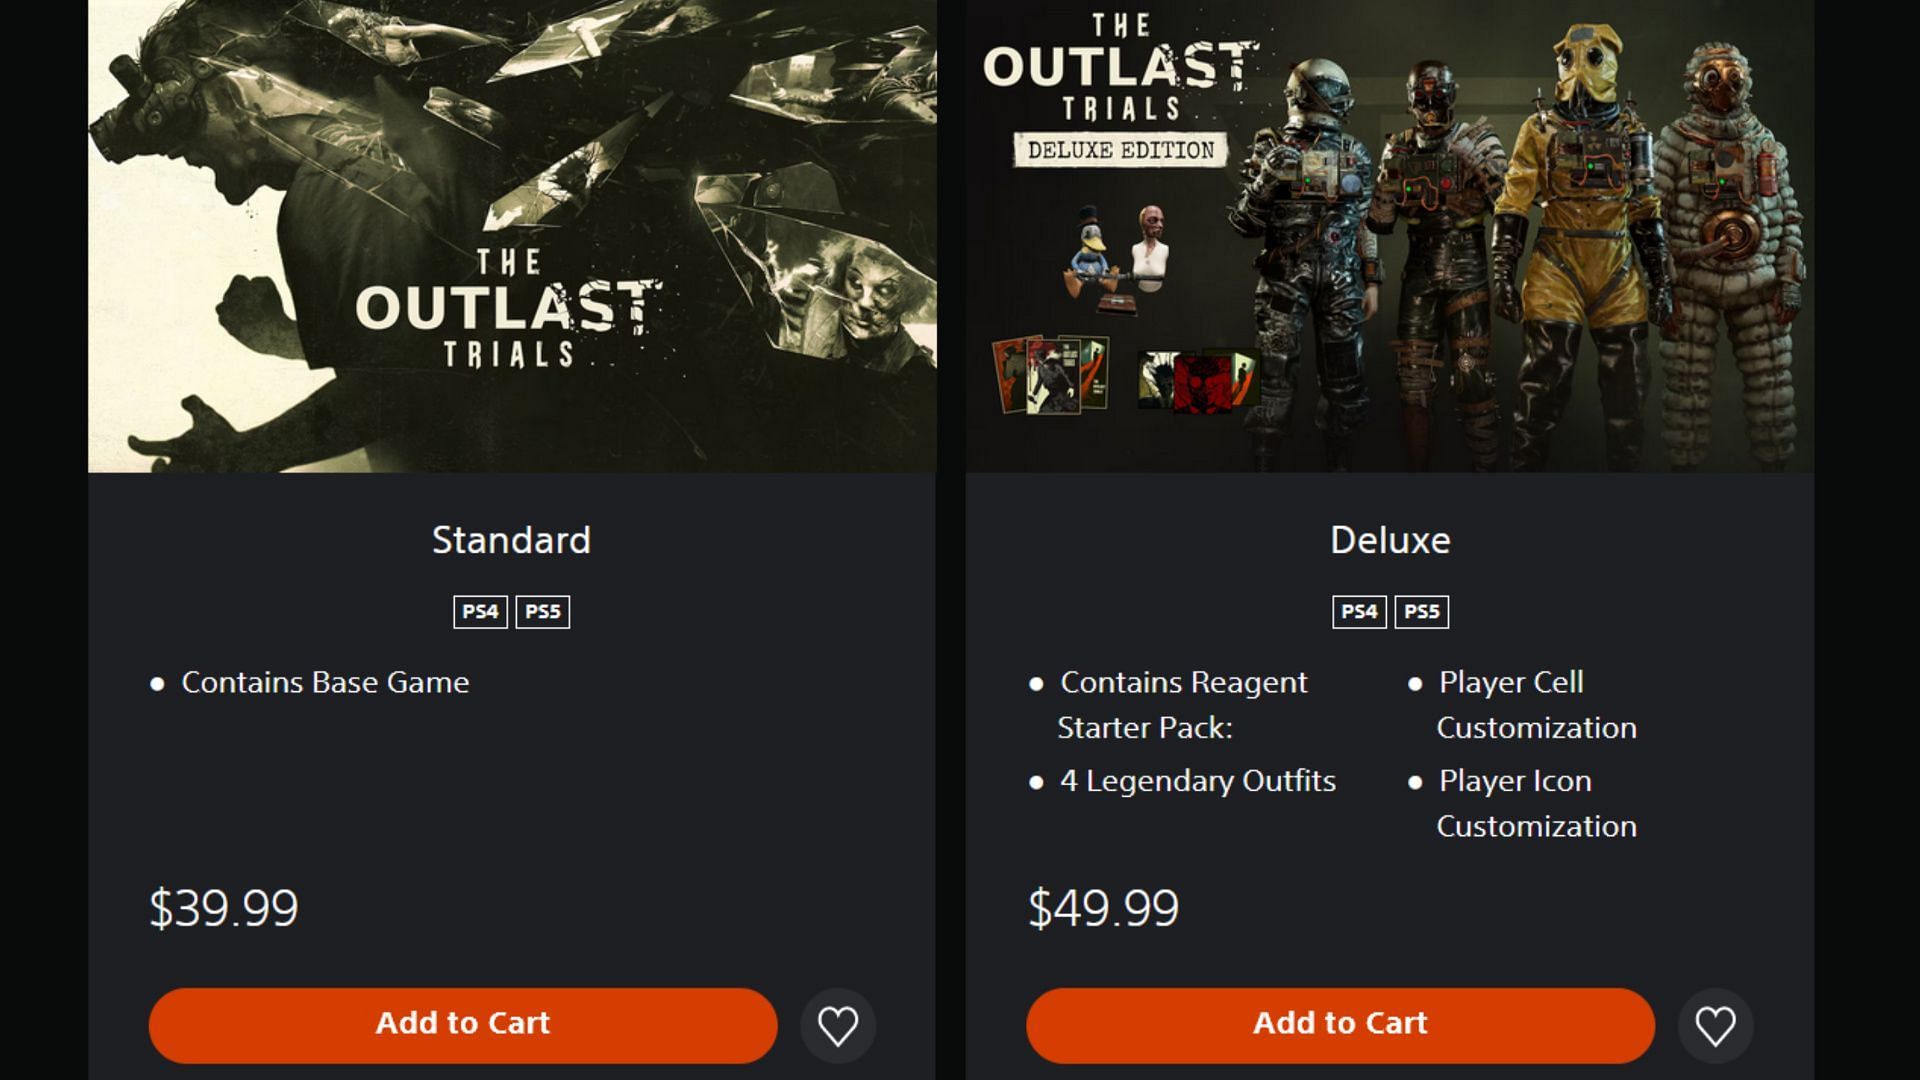 The Outlast Trials comes in two different editions, Standard and Deluxe (Image via PlayStation)